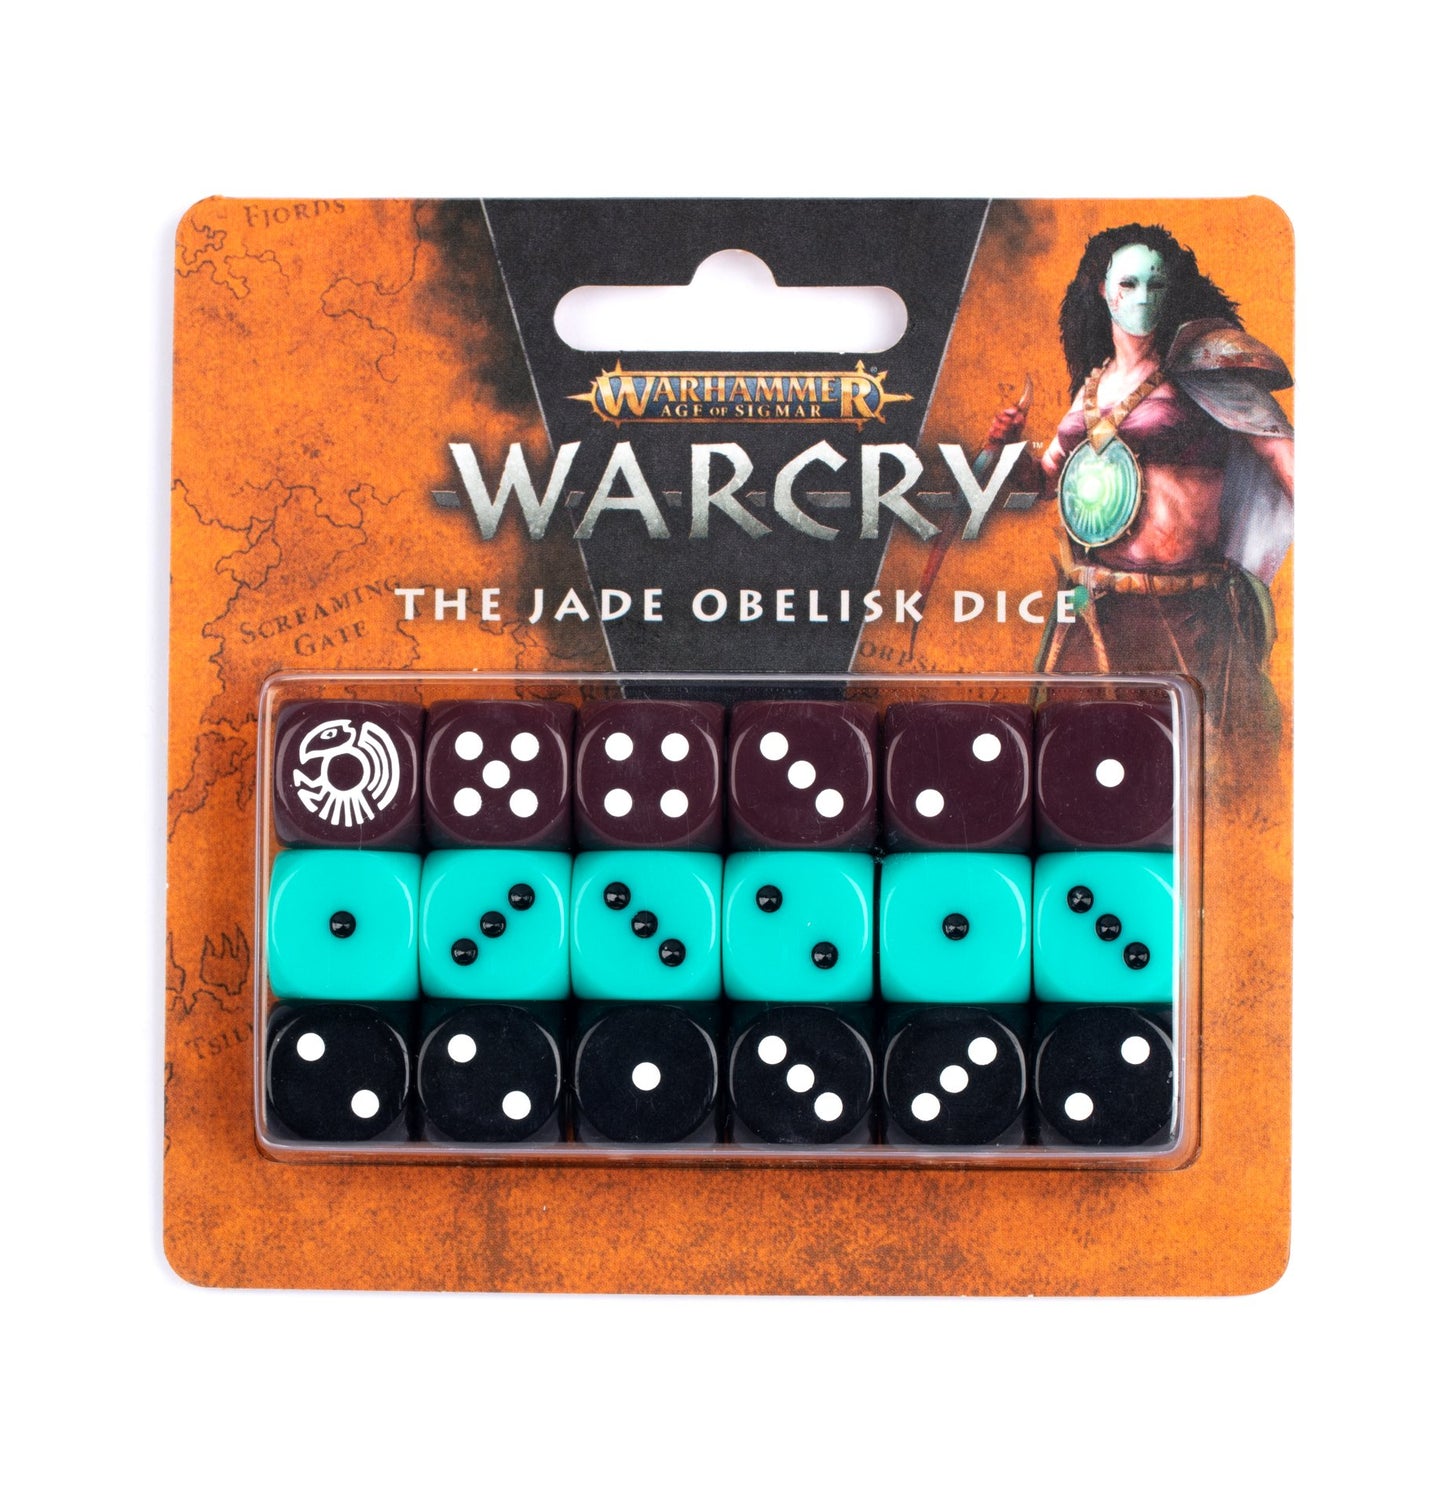 OUT - WARCRY: THE JADE OBELISK DICE